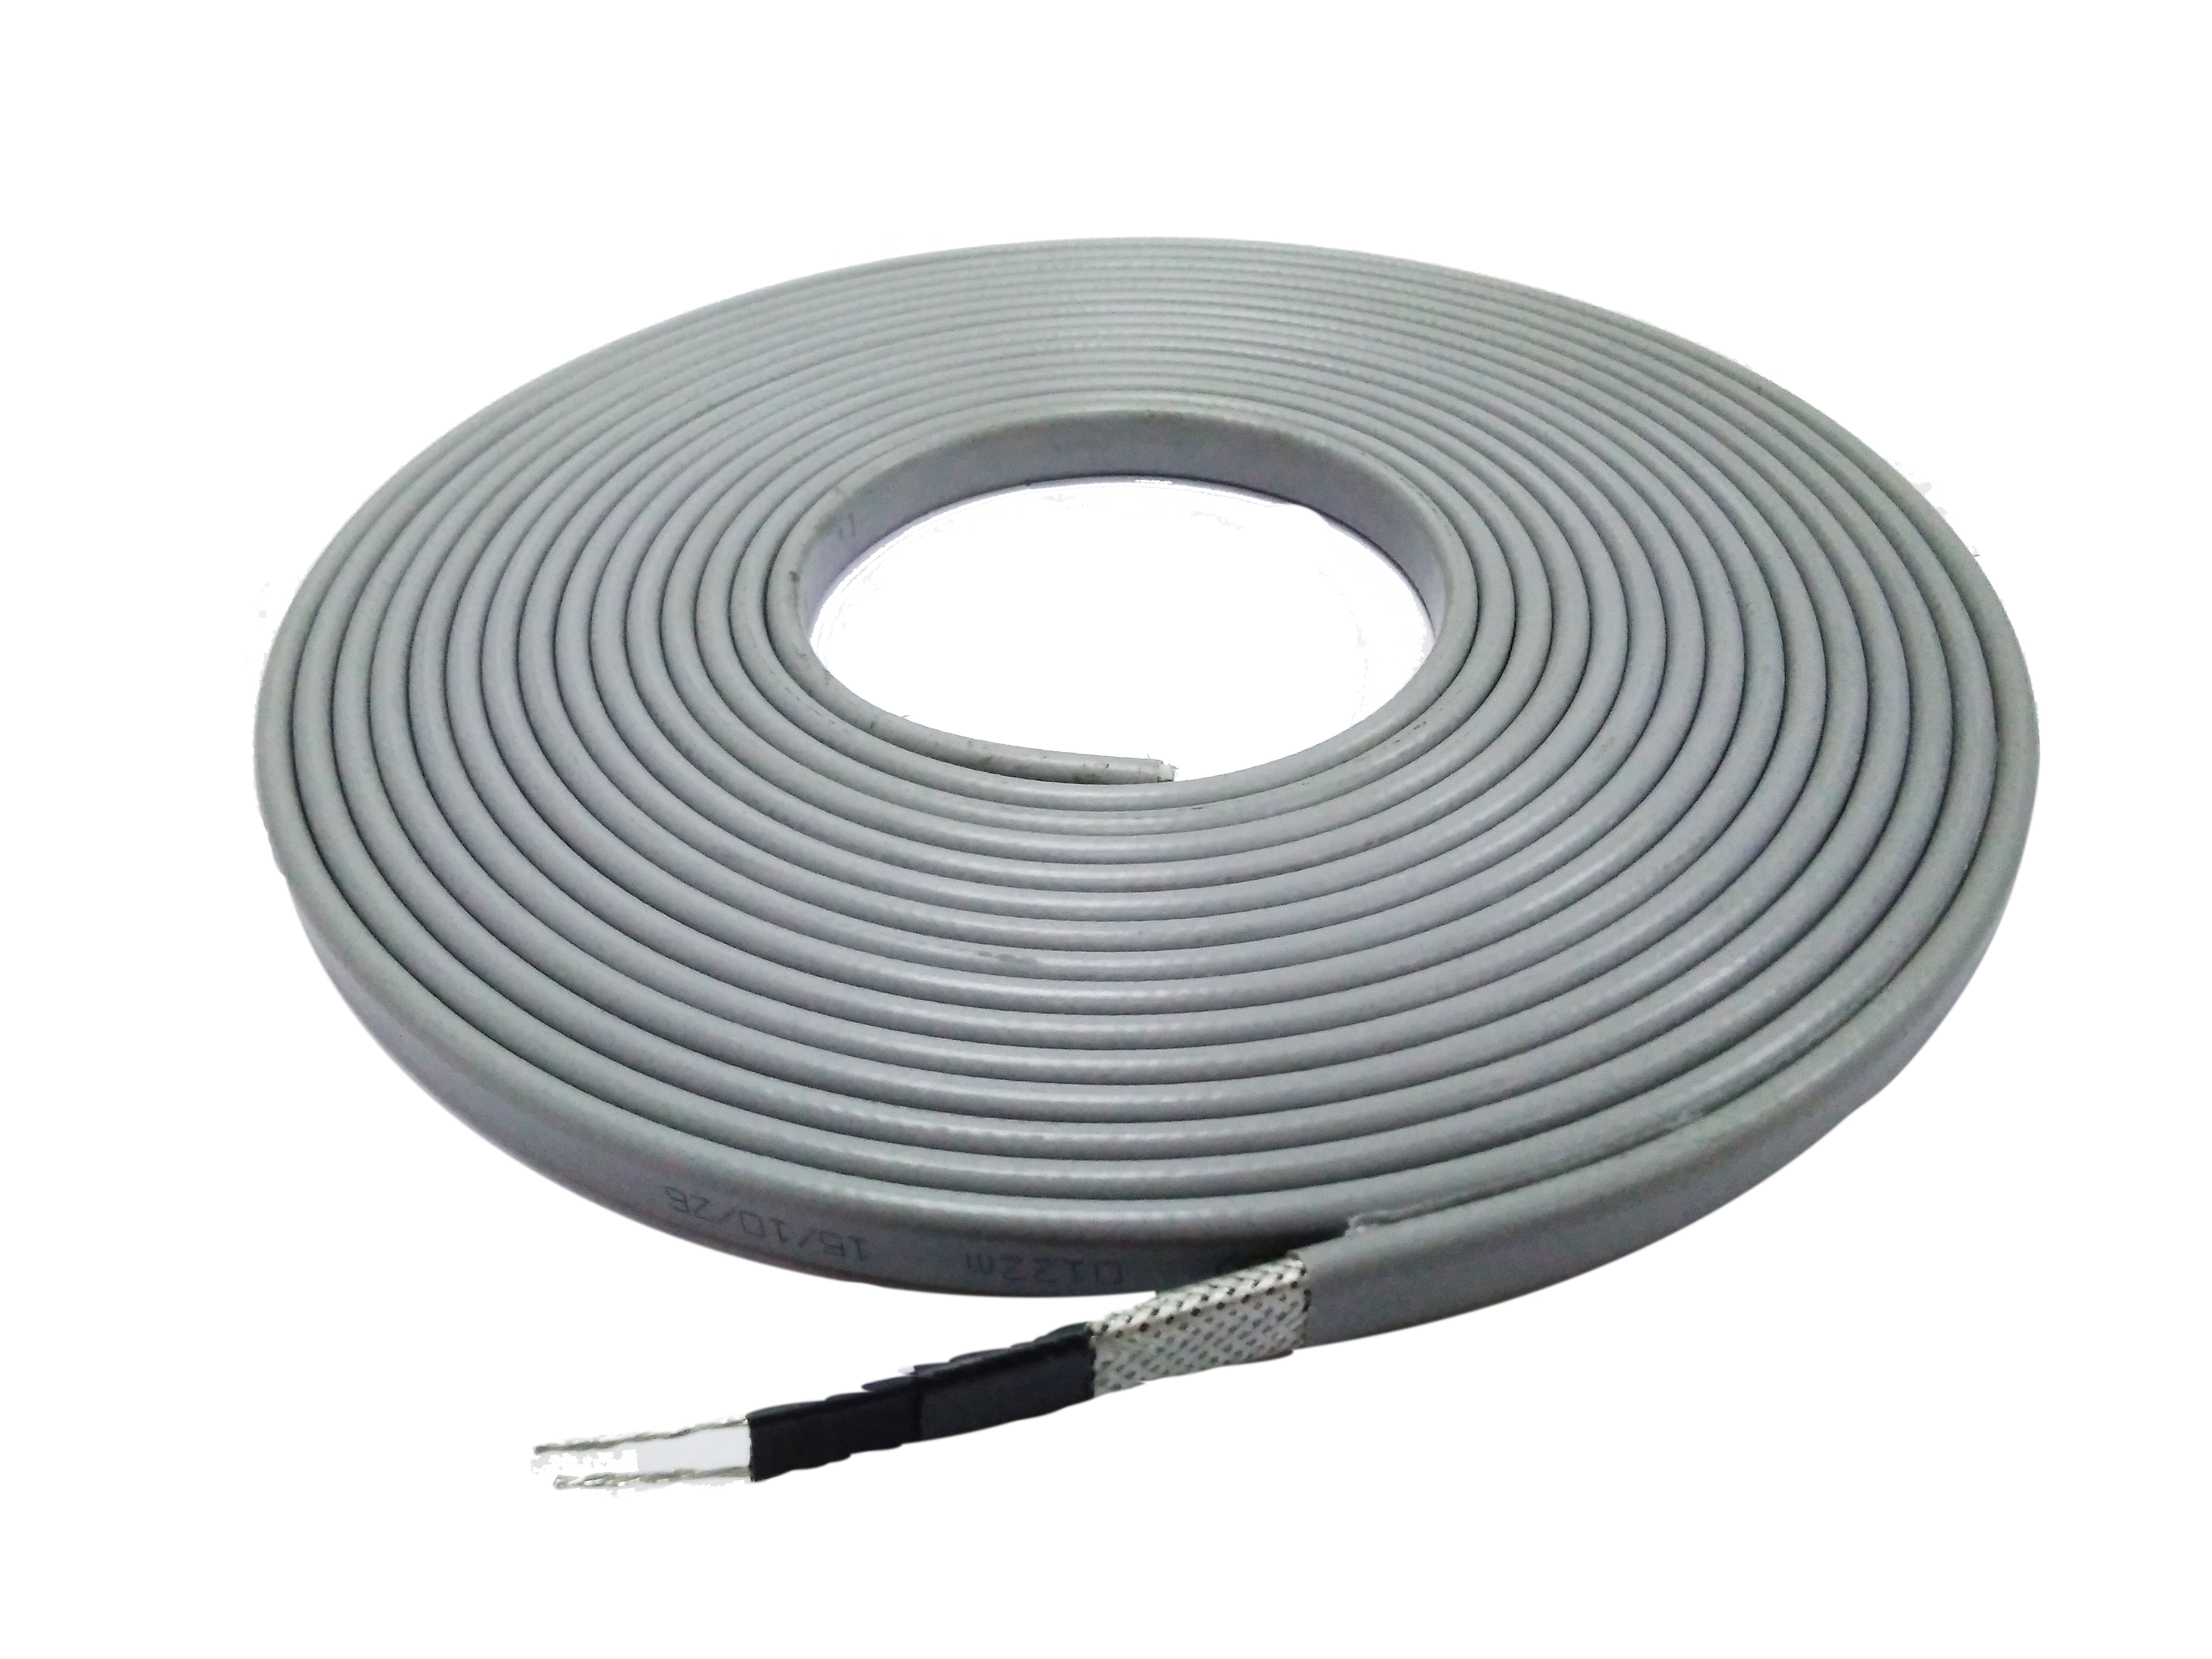 Solar electric heating tape cable mix and match installation phenomenon is serious